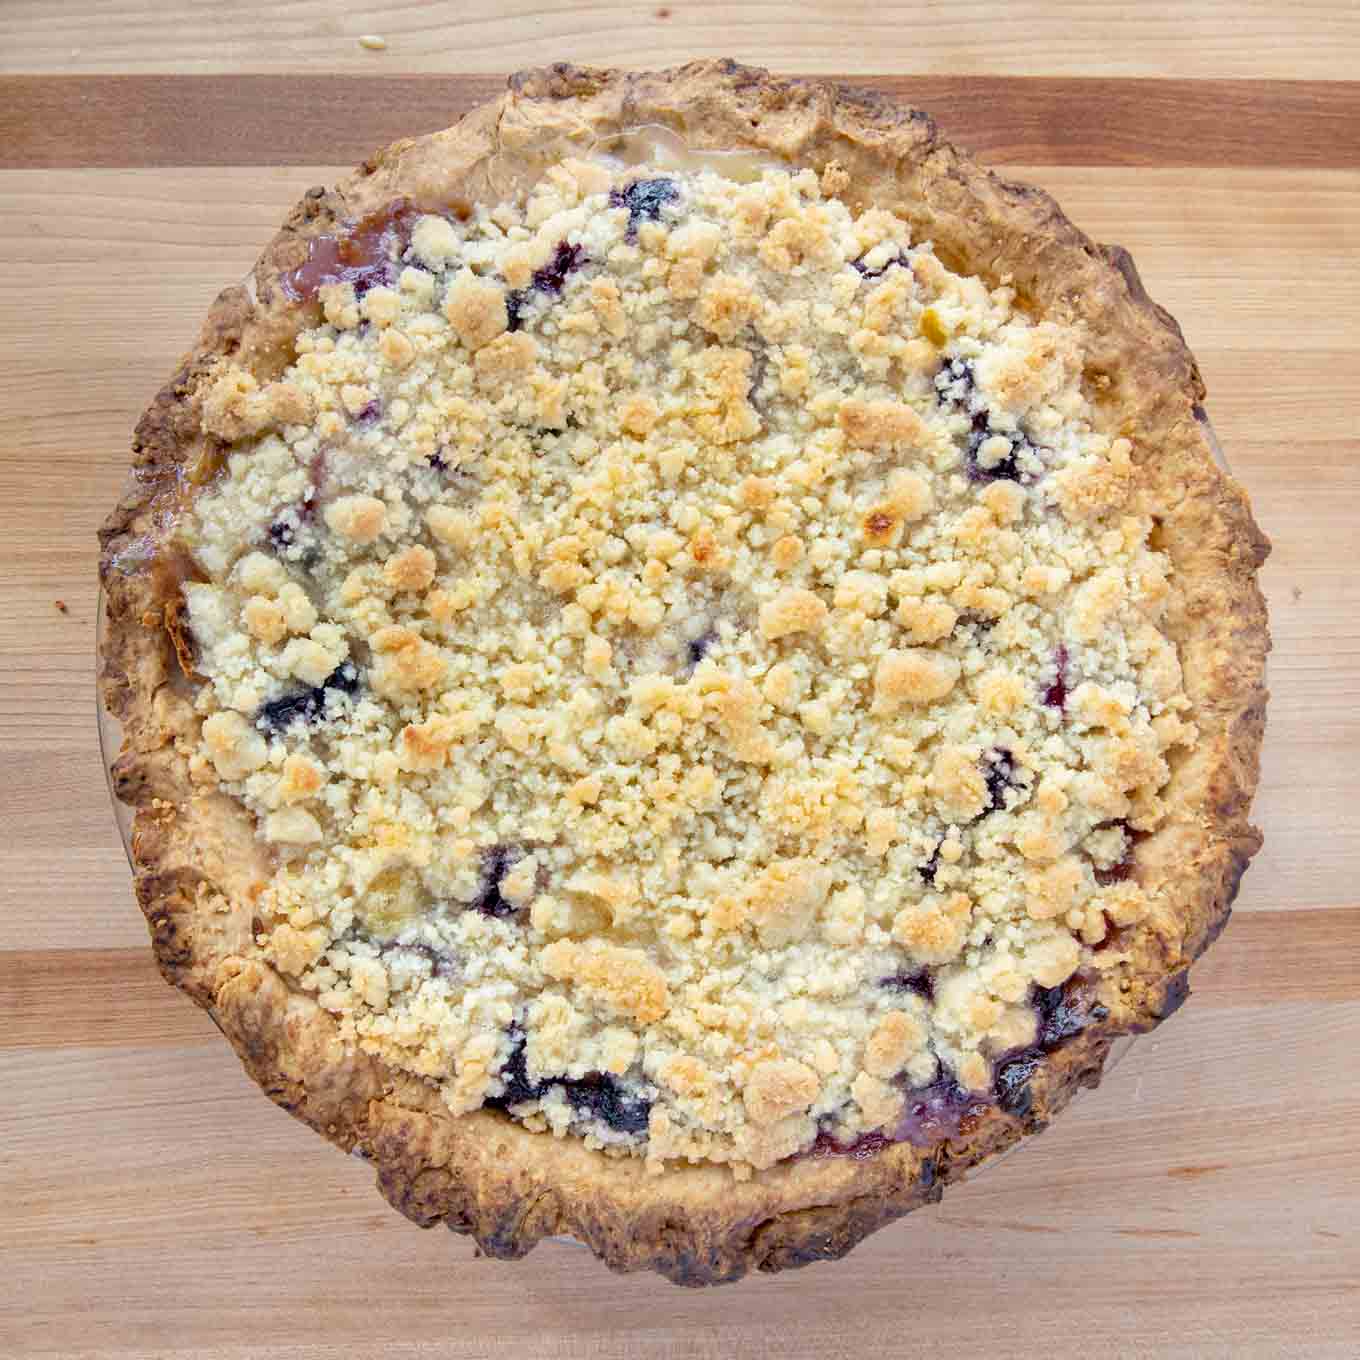 fully baked peach blueberry custard pie on a wooden cutting board